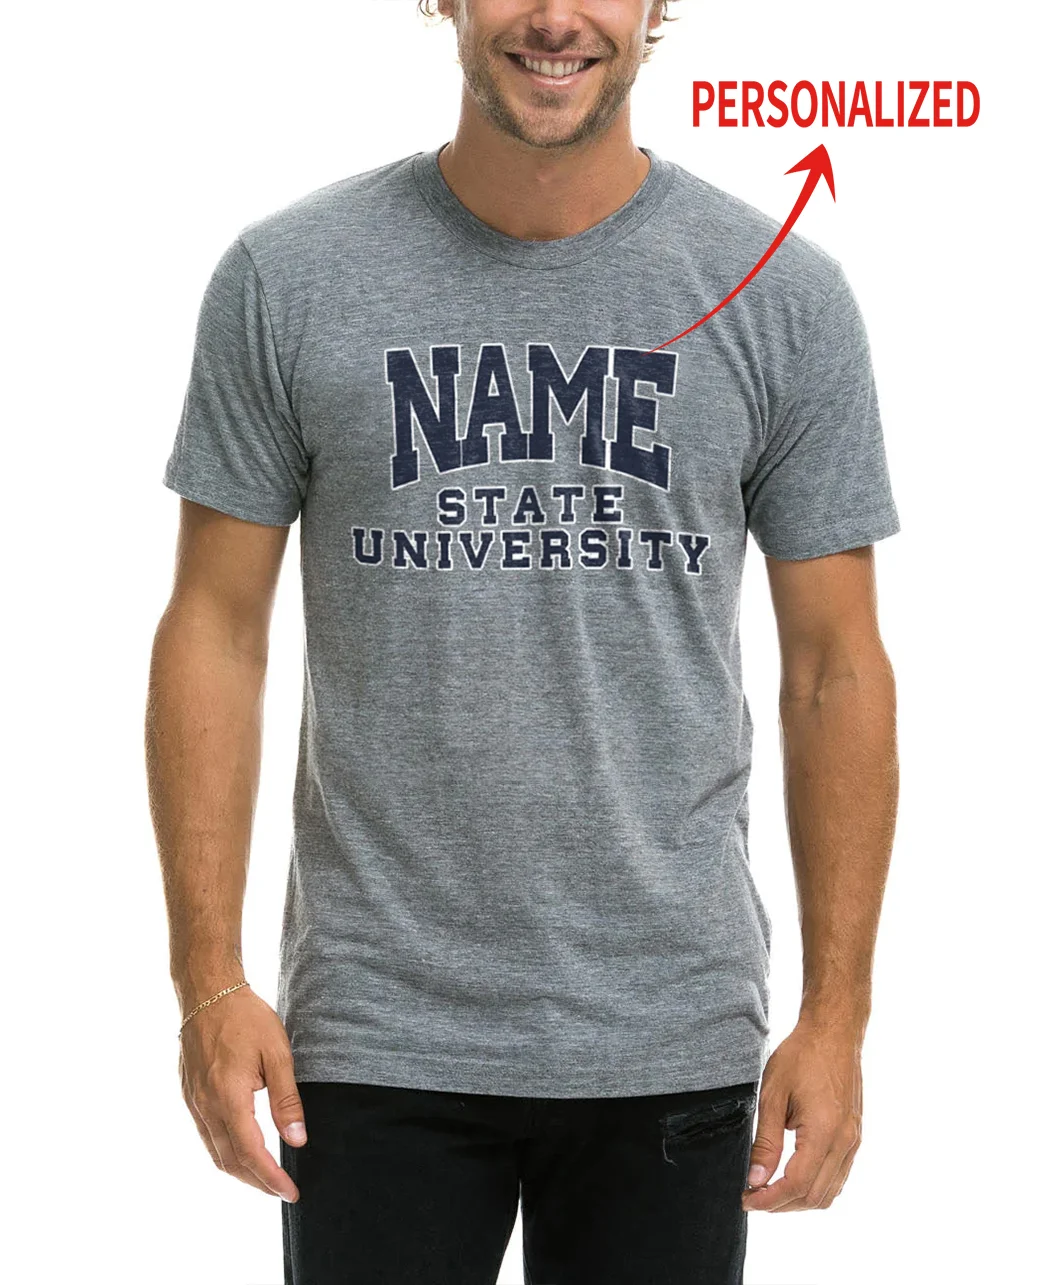 Personalized Name College T-Shirt 3 colors